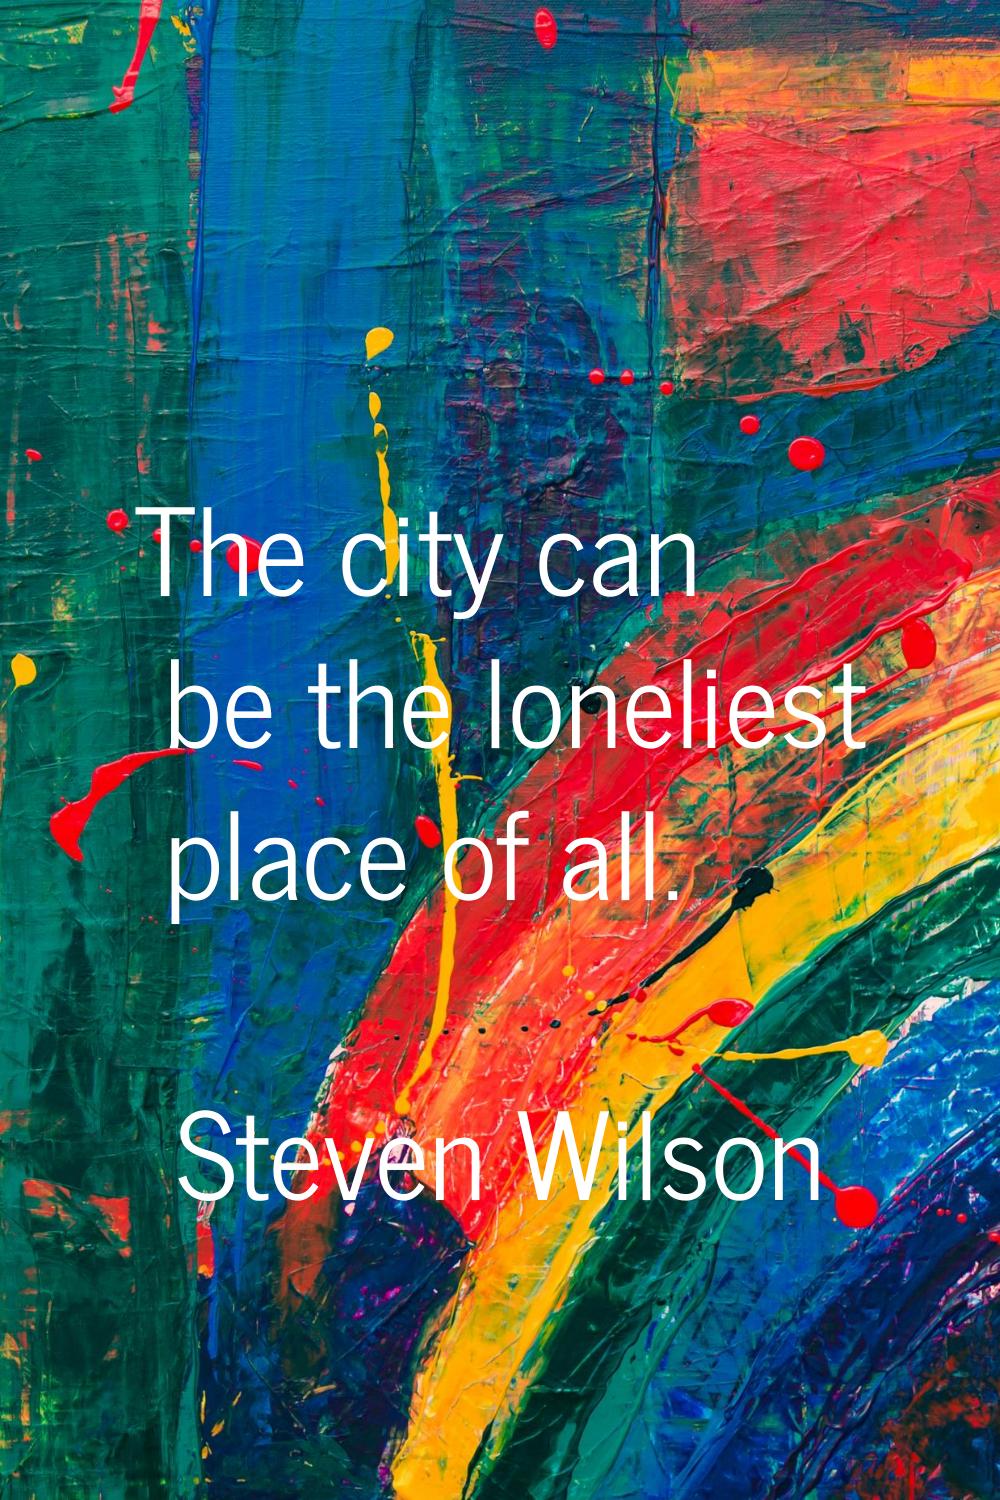 The city can be the loneliest place of all.